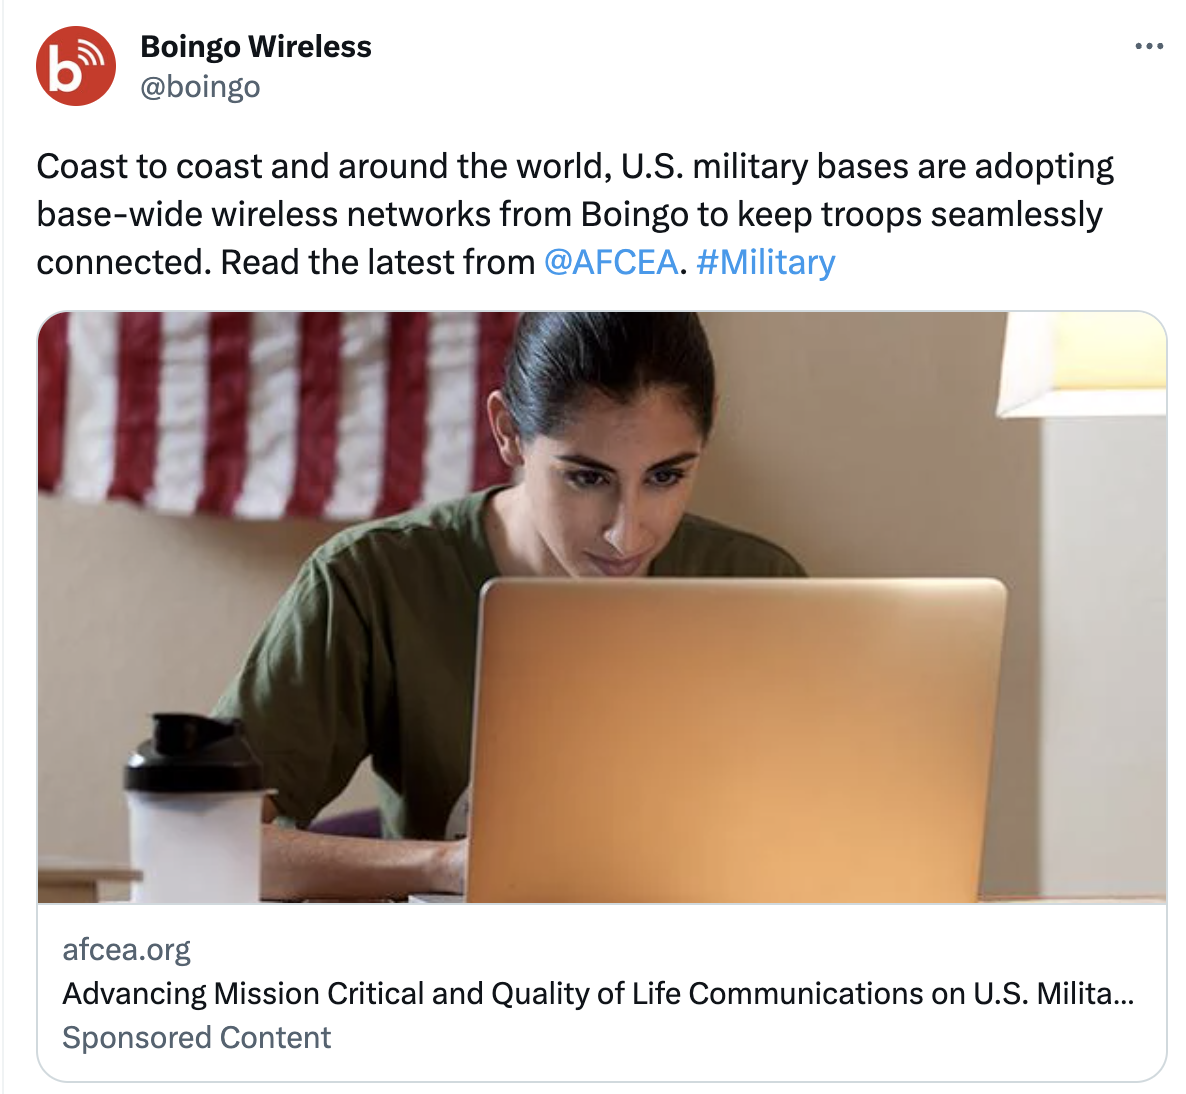 Tweet from Boingo is displayed captioned "Coast to coast and around the world, U.S. military bases are adopting base-wide wireless networks from Boingo to keep troops seamlessly connected. Read the lates from @AFCEA #Military"